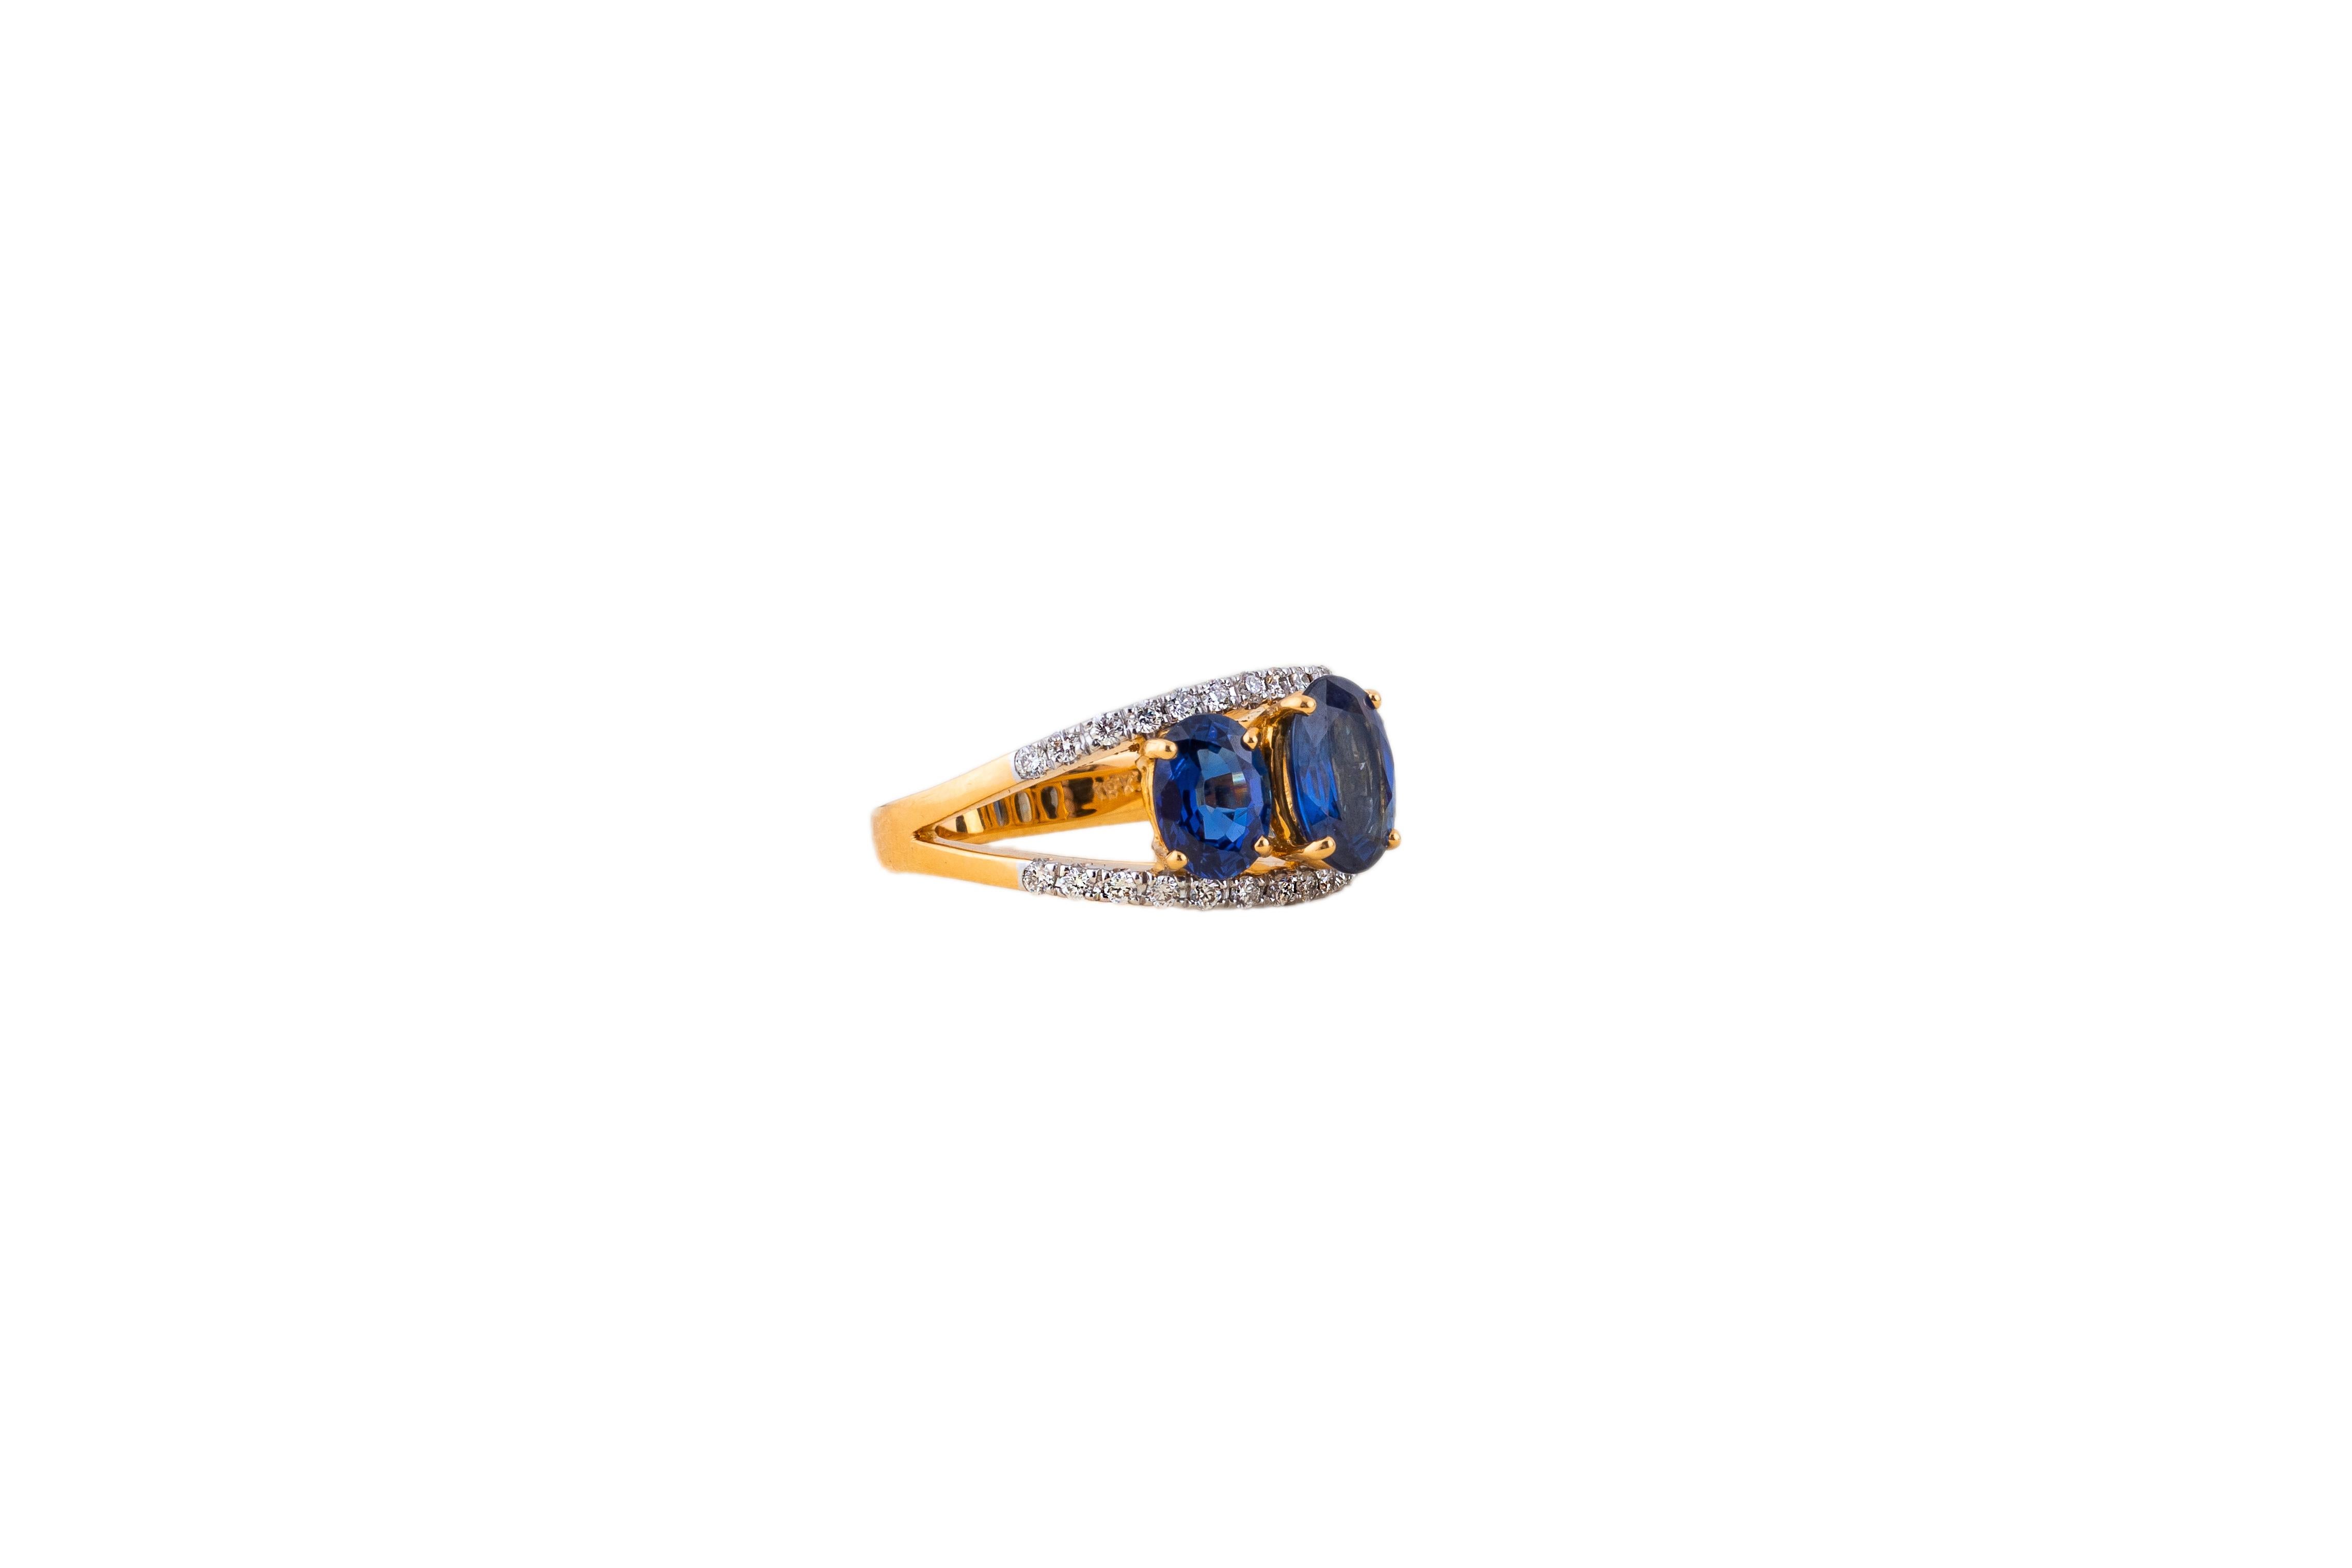 750 yellow gold 18k
hallmarked with fineness
3 blue sapphires with a total of 4,01 ct
30 diamonds with a total of 0.36 ct
Ring size: 54
Weight: 6,8 g